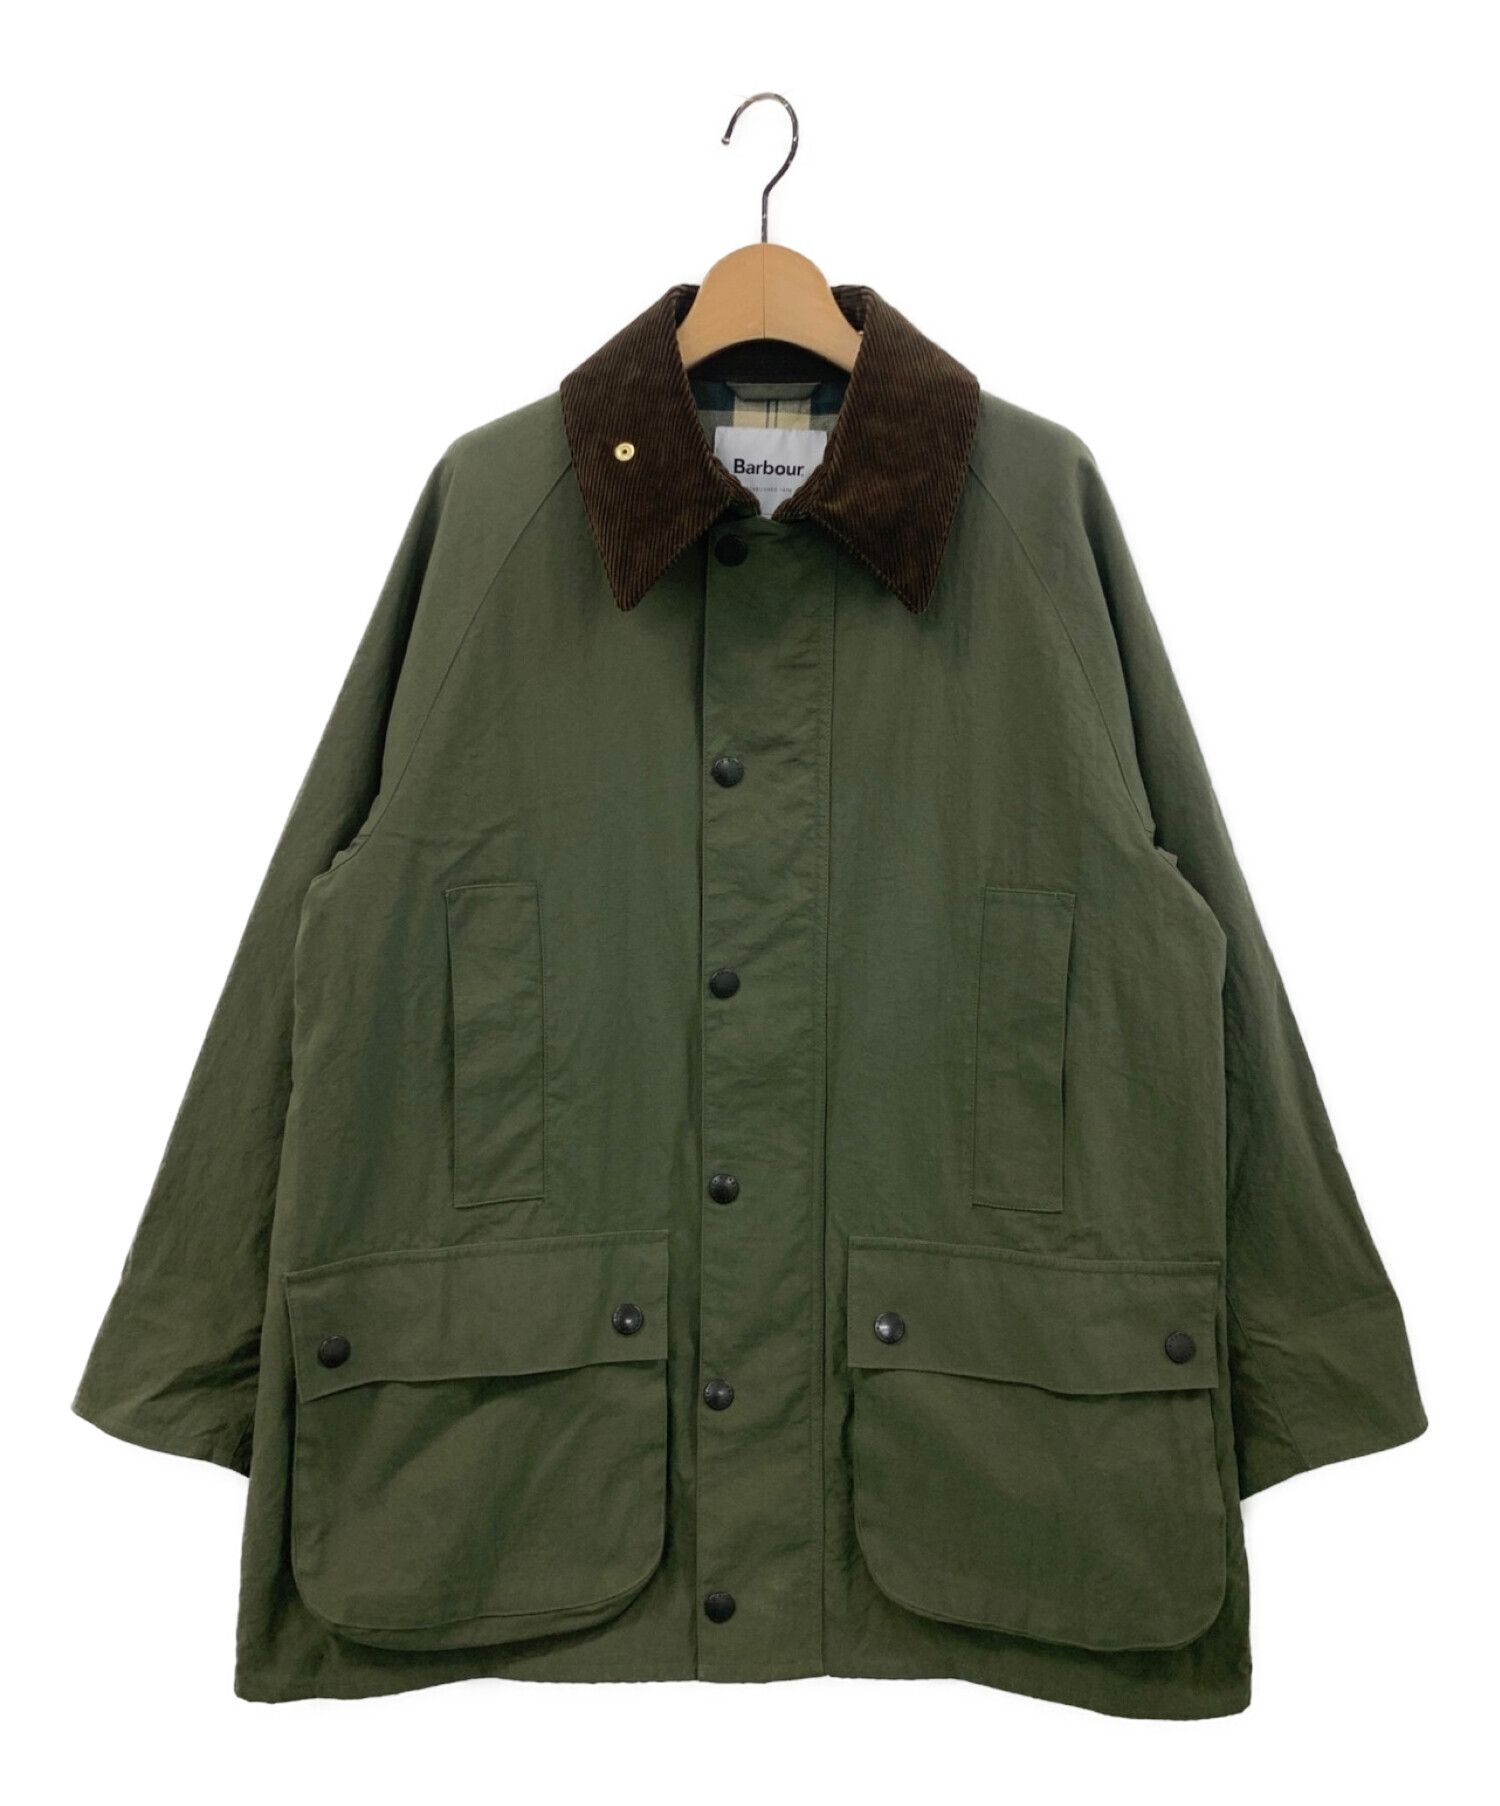 spick and span  Barbour BEAUFORT下記サイトより引用